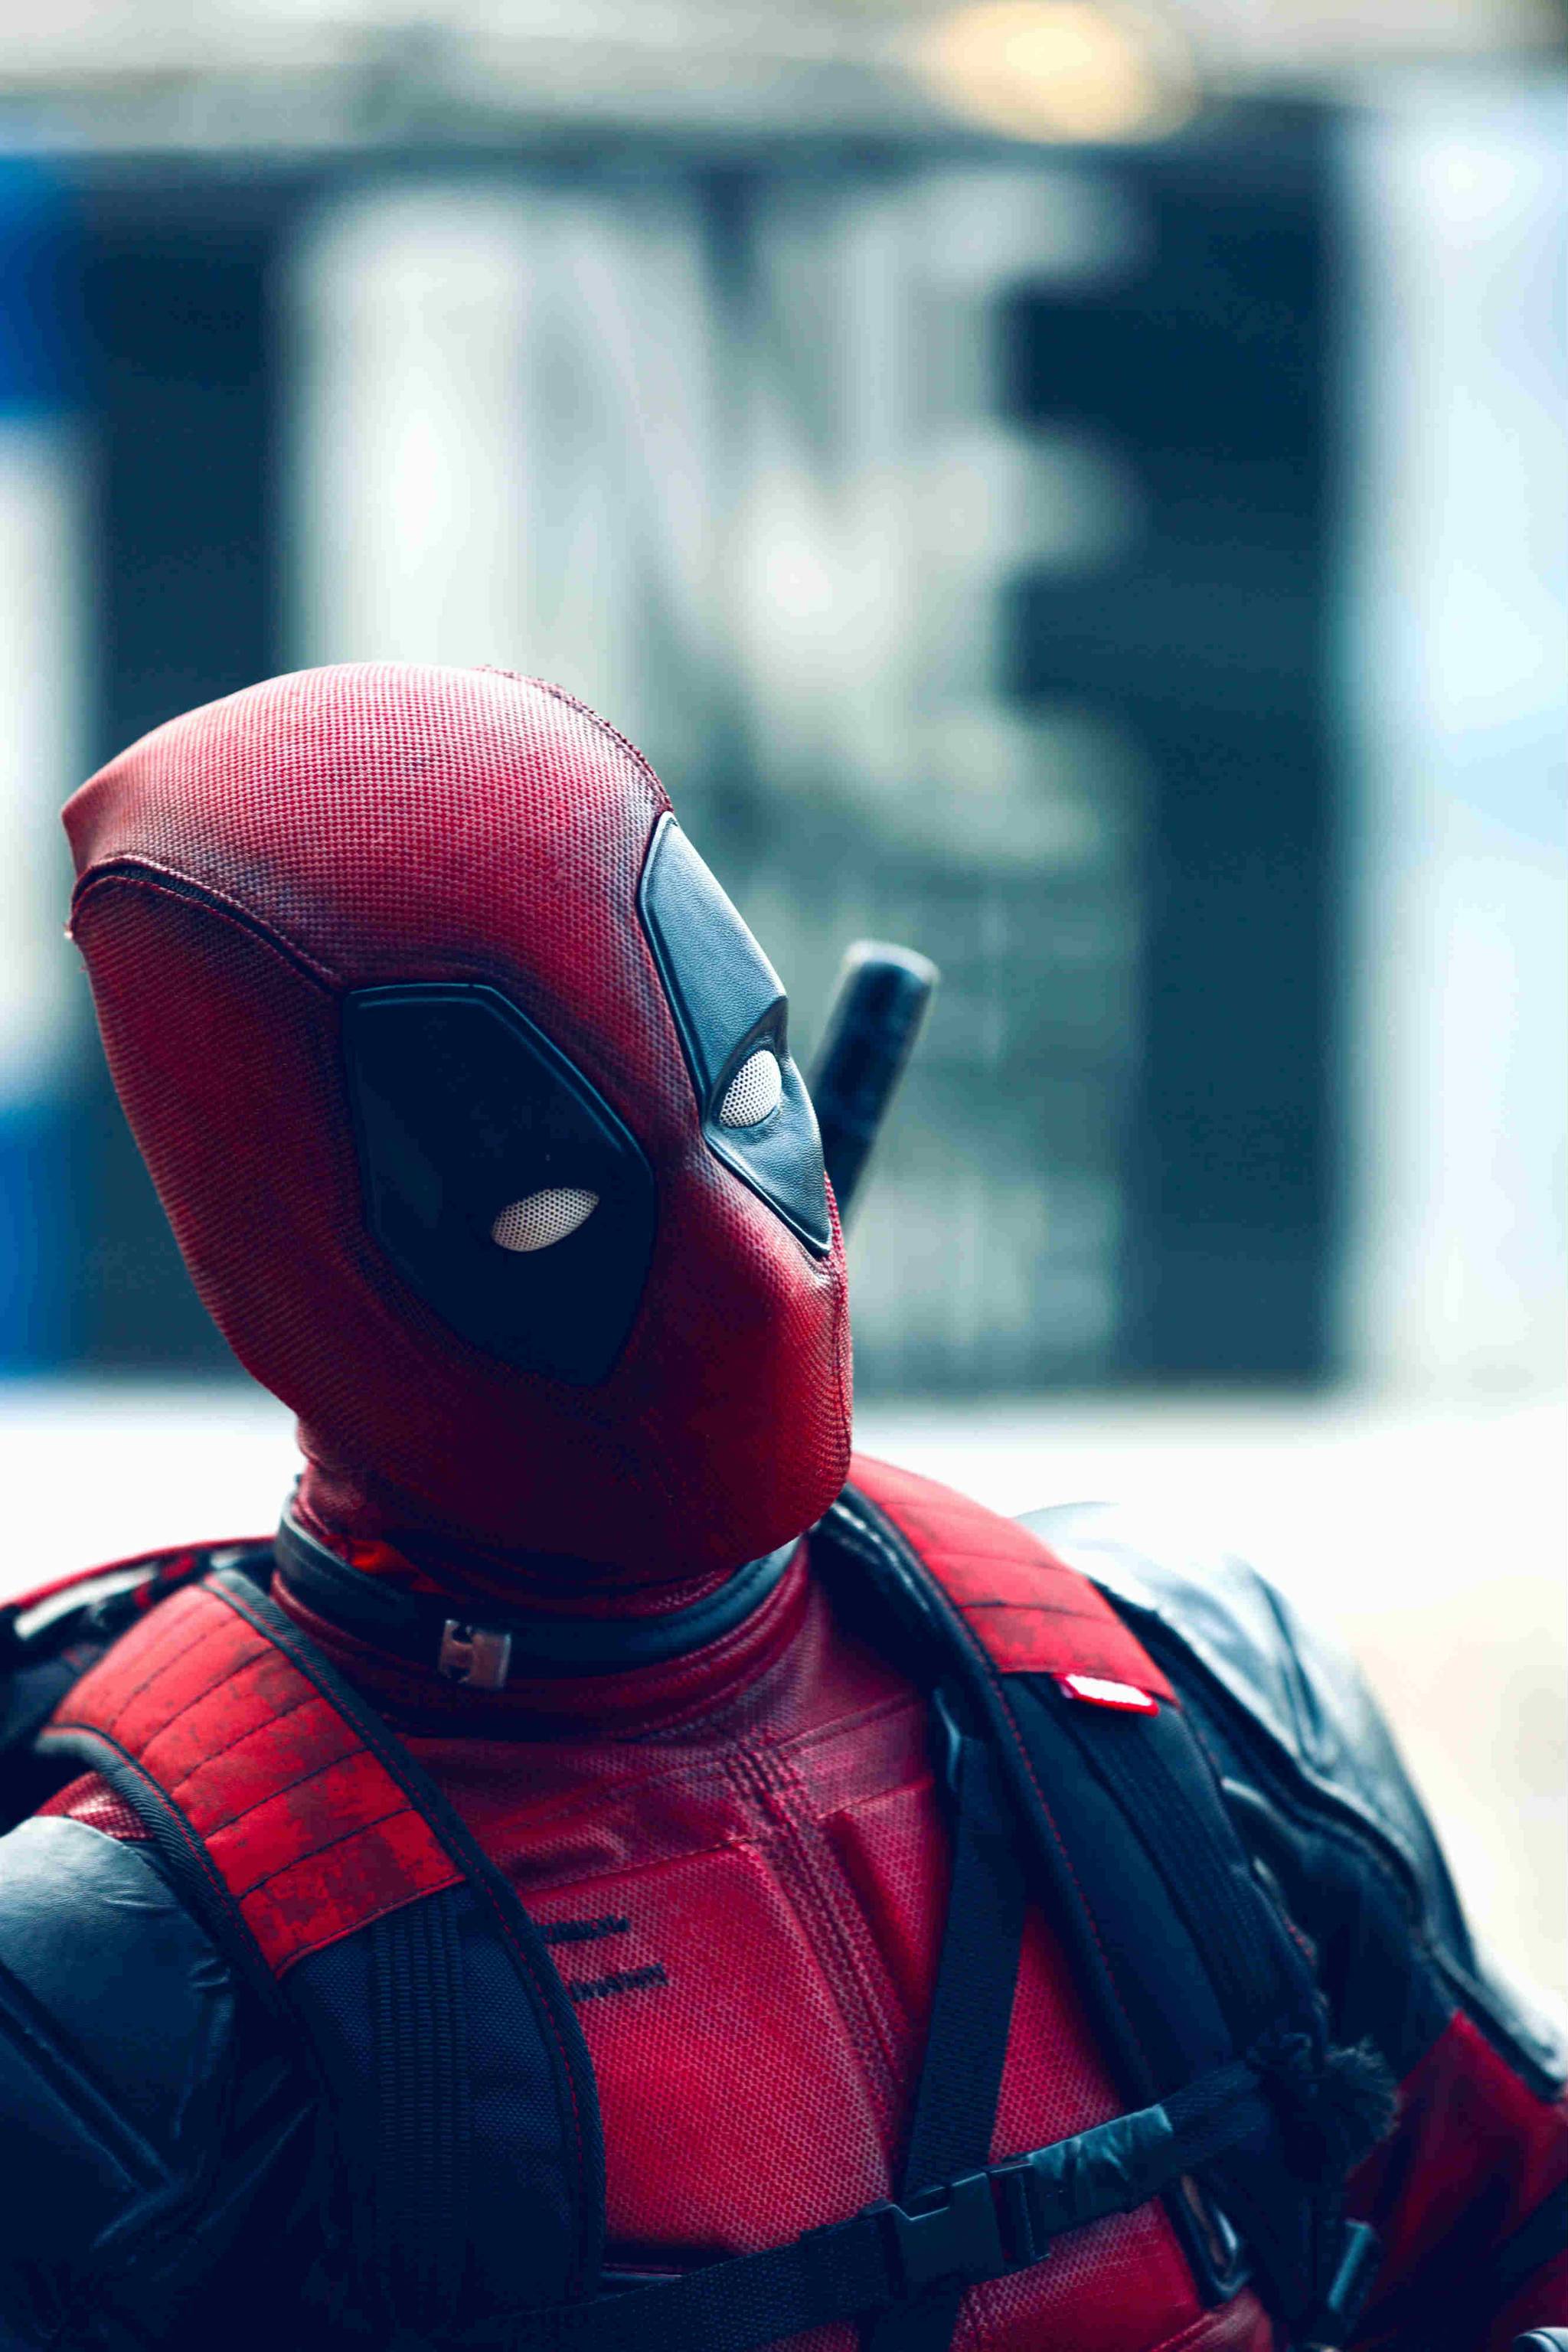 Deadpool 2 campaign appeals to irreverent personas